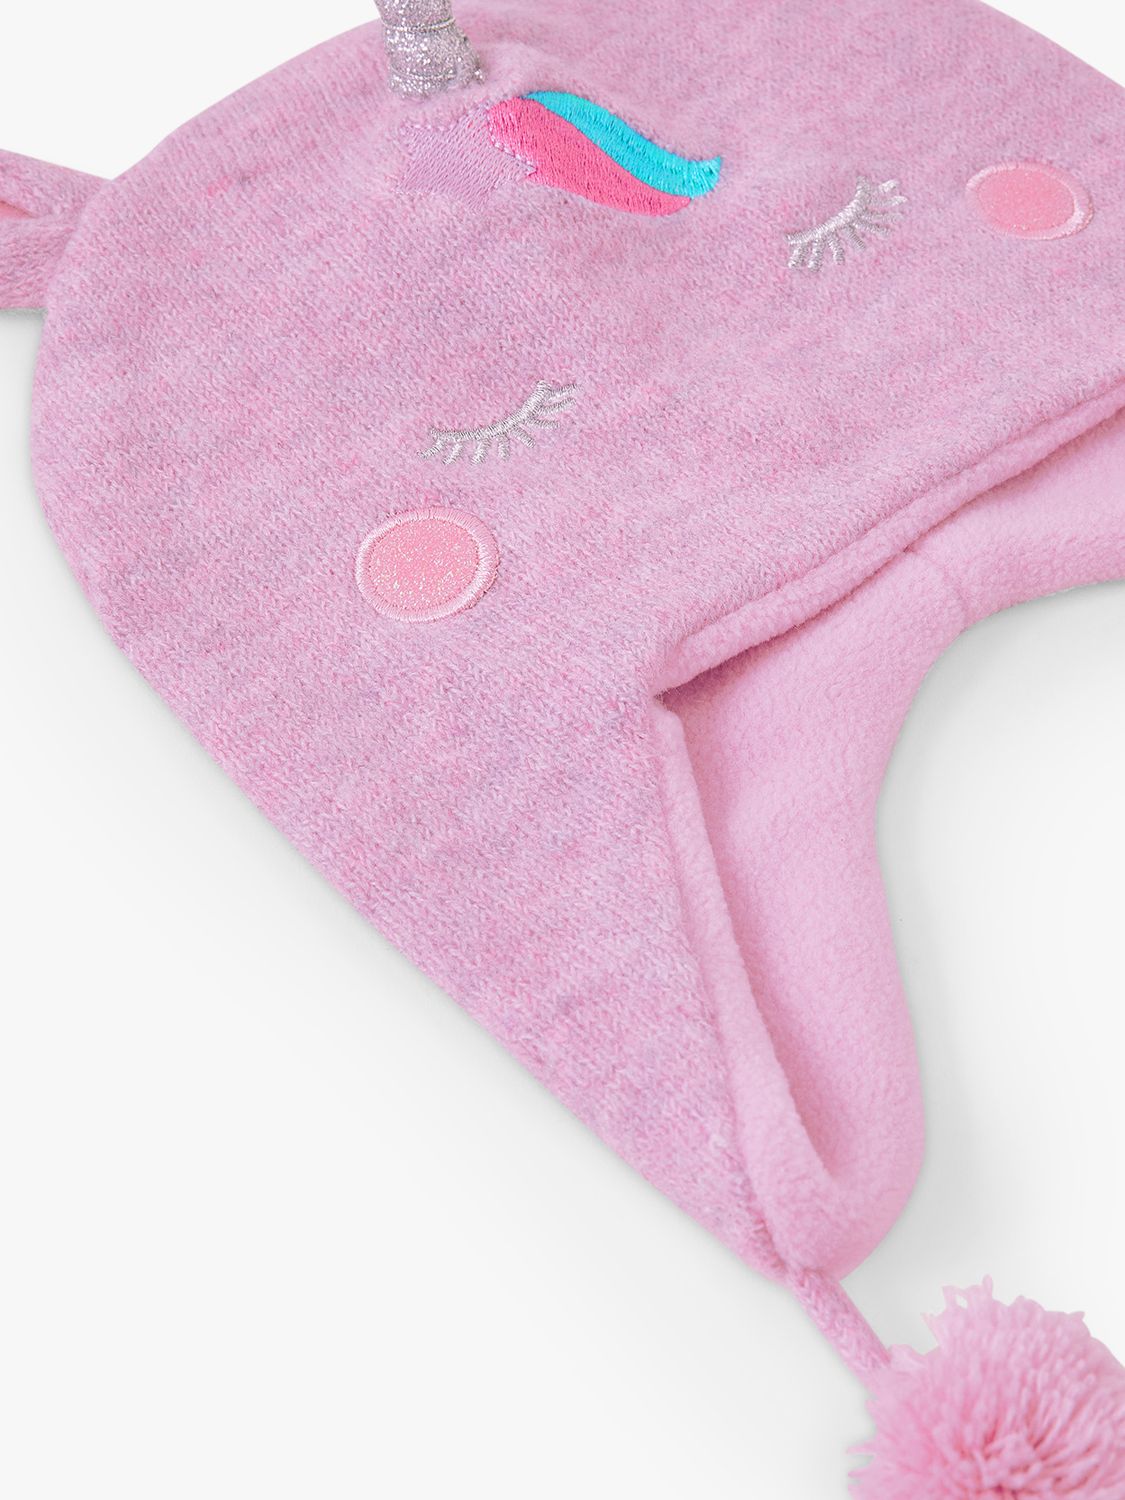 Buy Angels by Accessorize Kids' Unicorn Knit Hat, Lilac/Multi Online at johnlewis.com